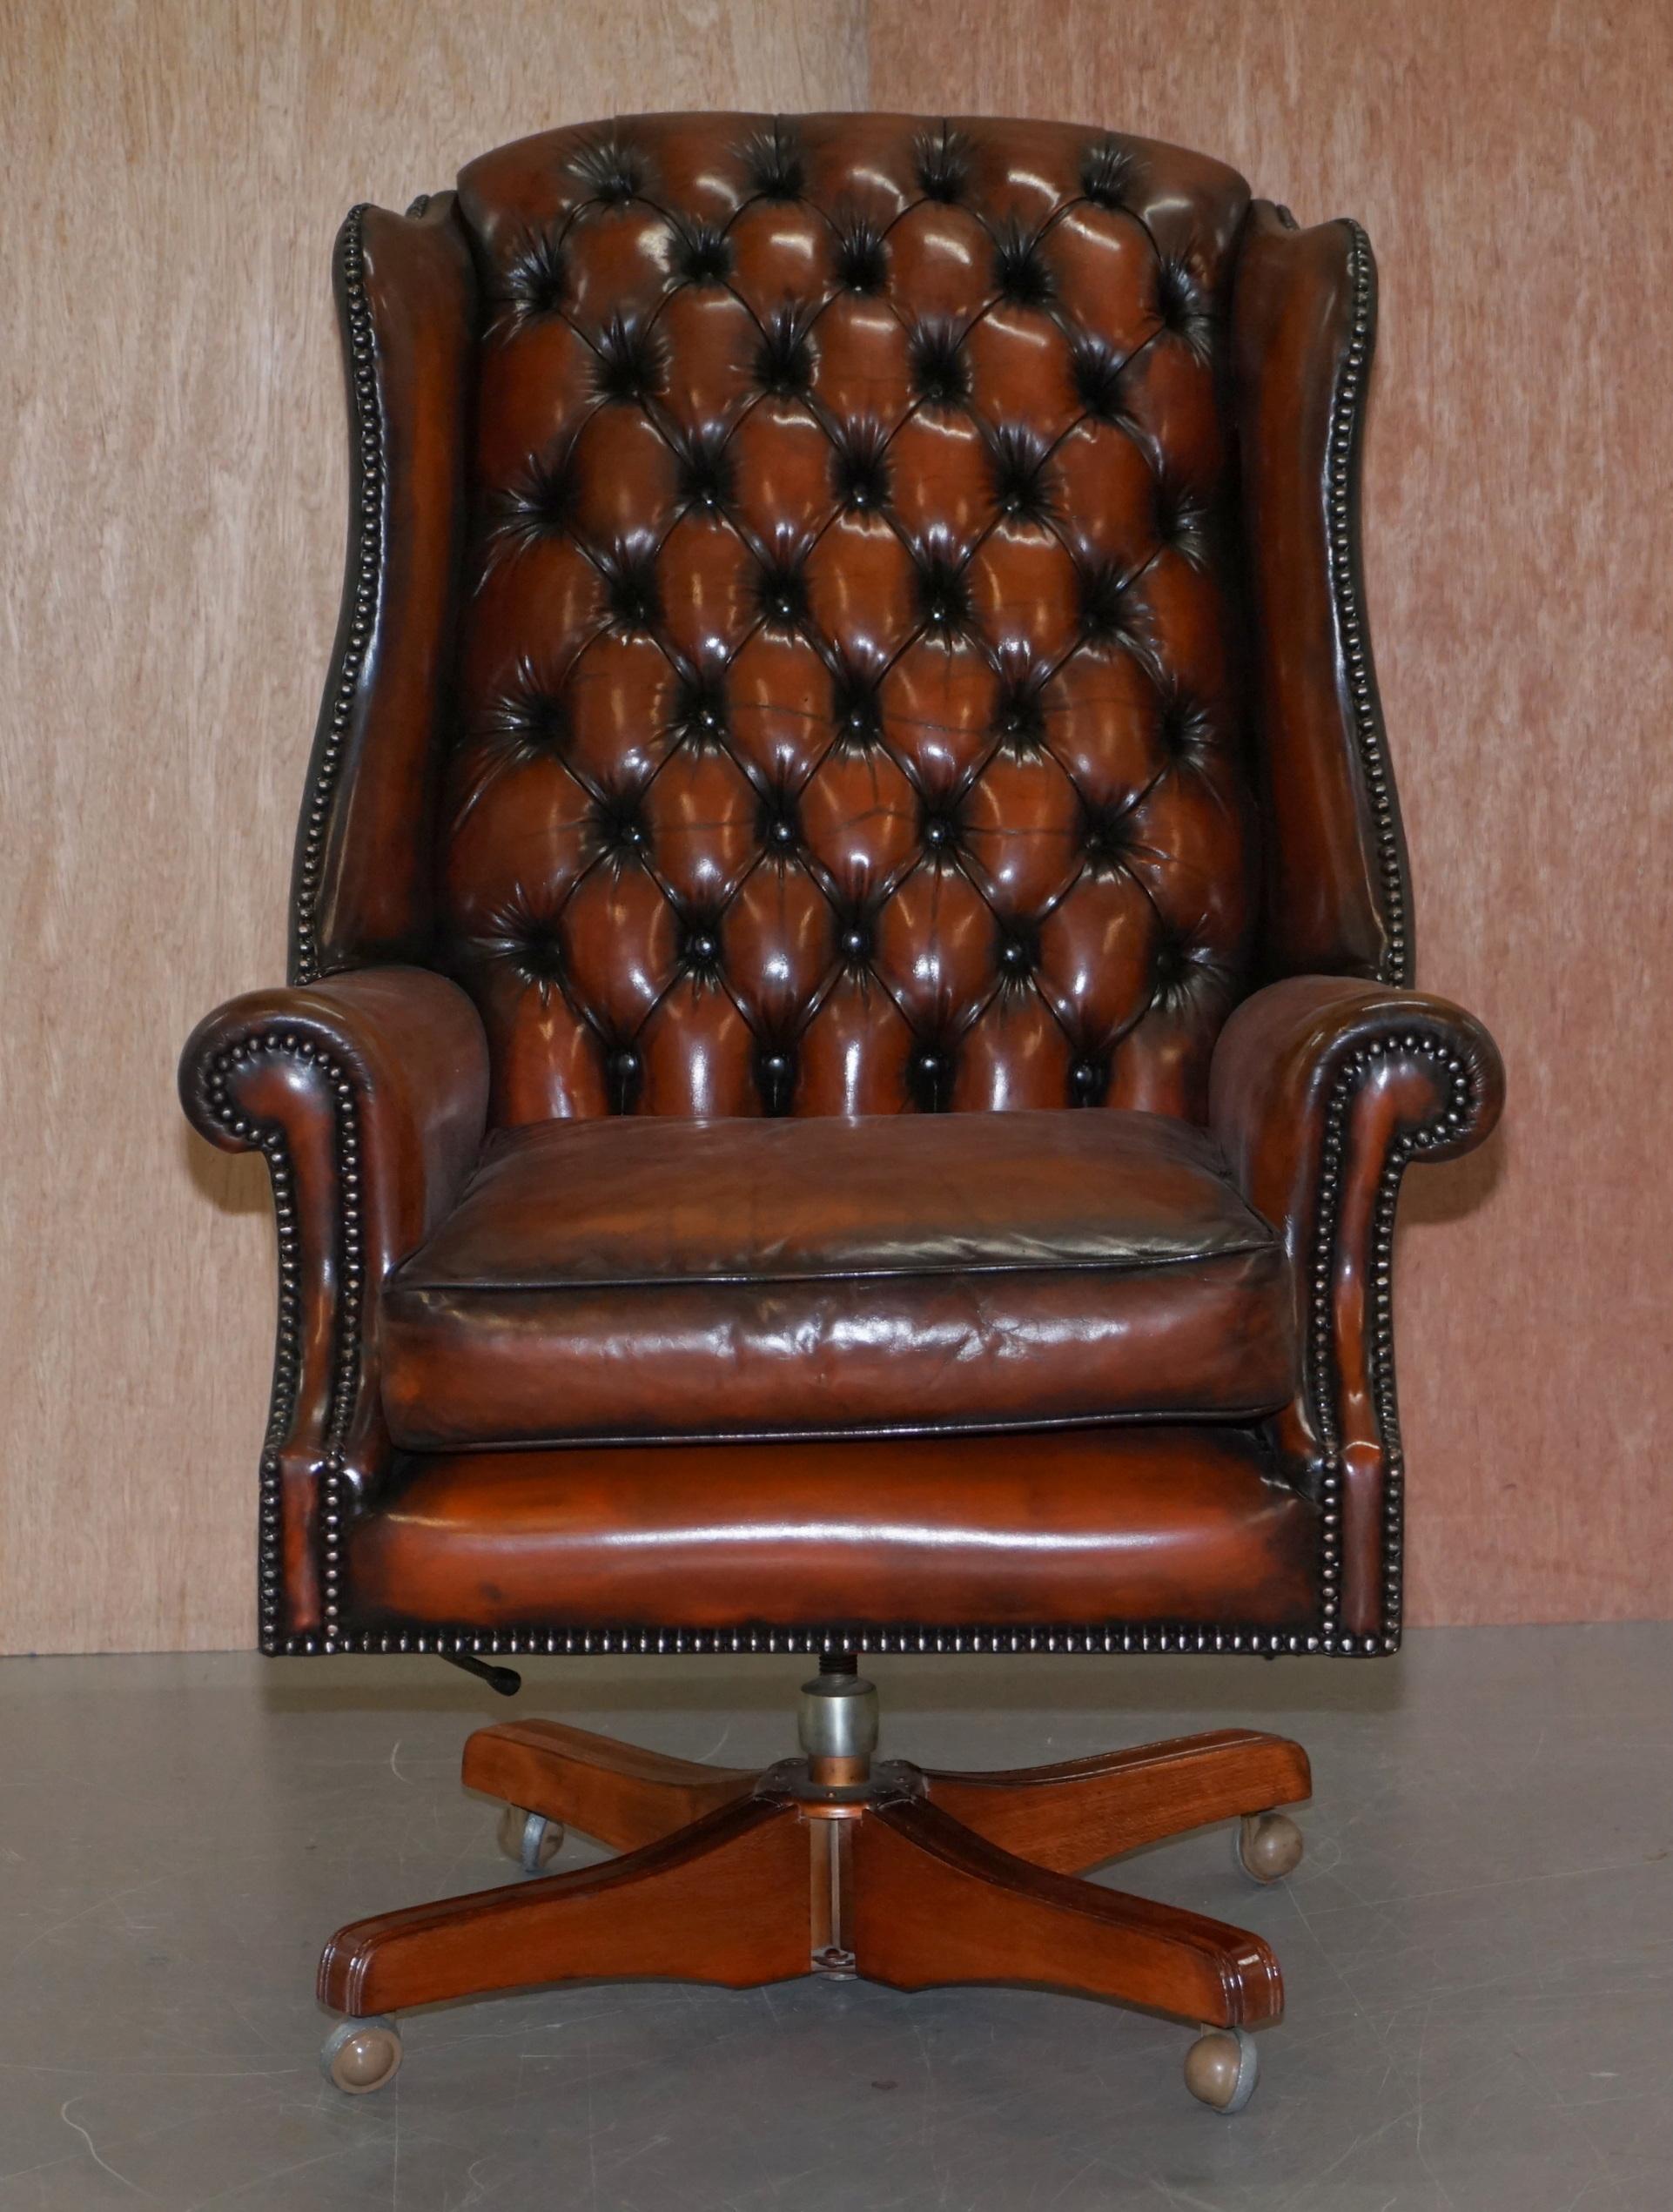 Wimbledon-Furniture

Wimbledon-Furniture is delighted to offer for sale this stunning fully restored Harrods London retailed Pegasus art forma hand dyed cigar brown leather exceptionally comfortable Chesterfield Wingback directors chair 

Please